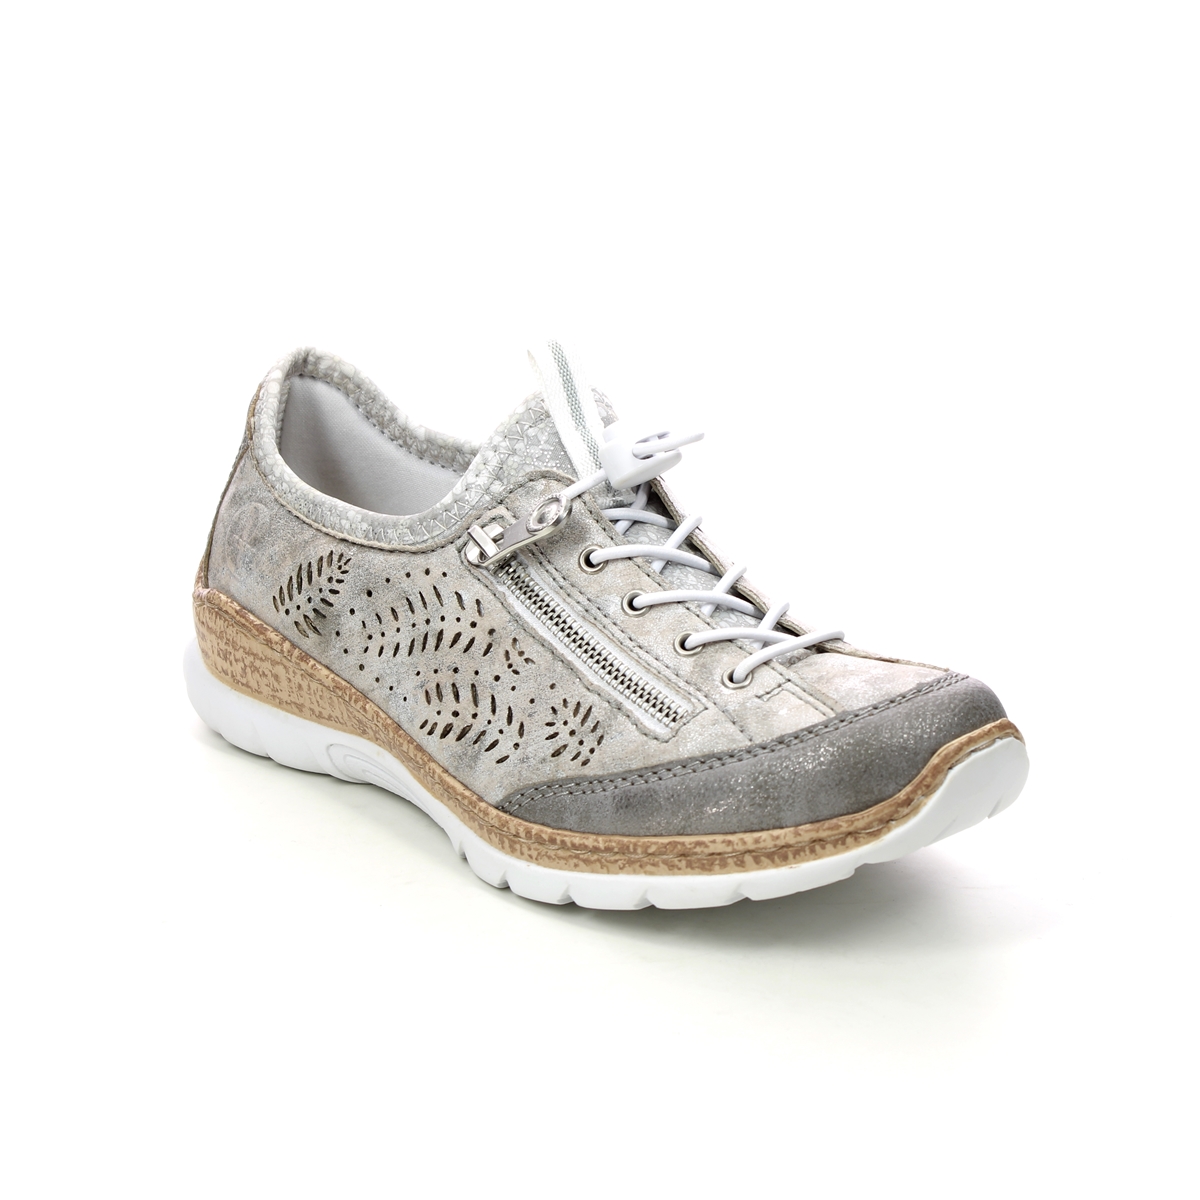 Rieker Empire Silver Womens Lacing Shoes N42K6-40 In Size 38 In Plain Silver